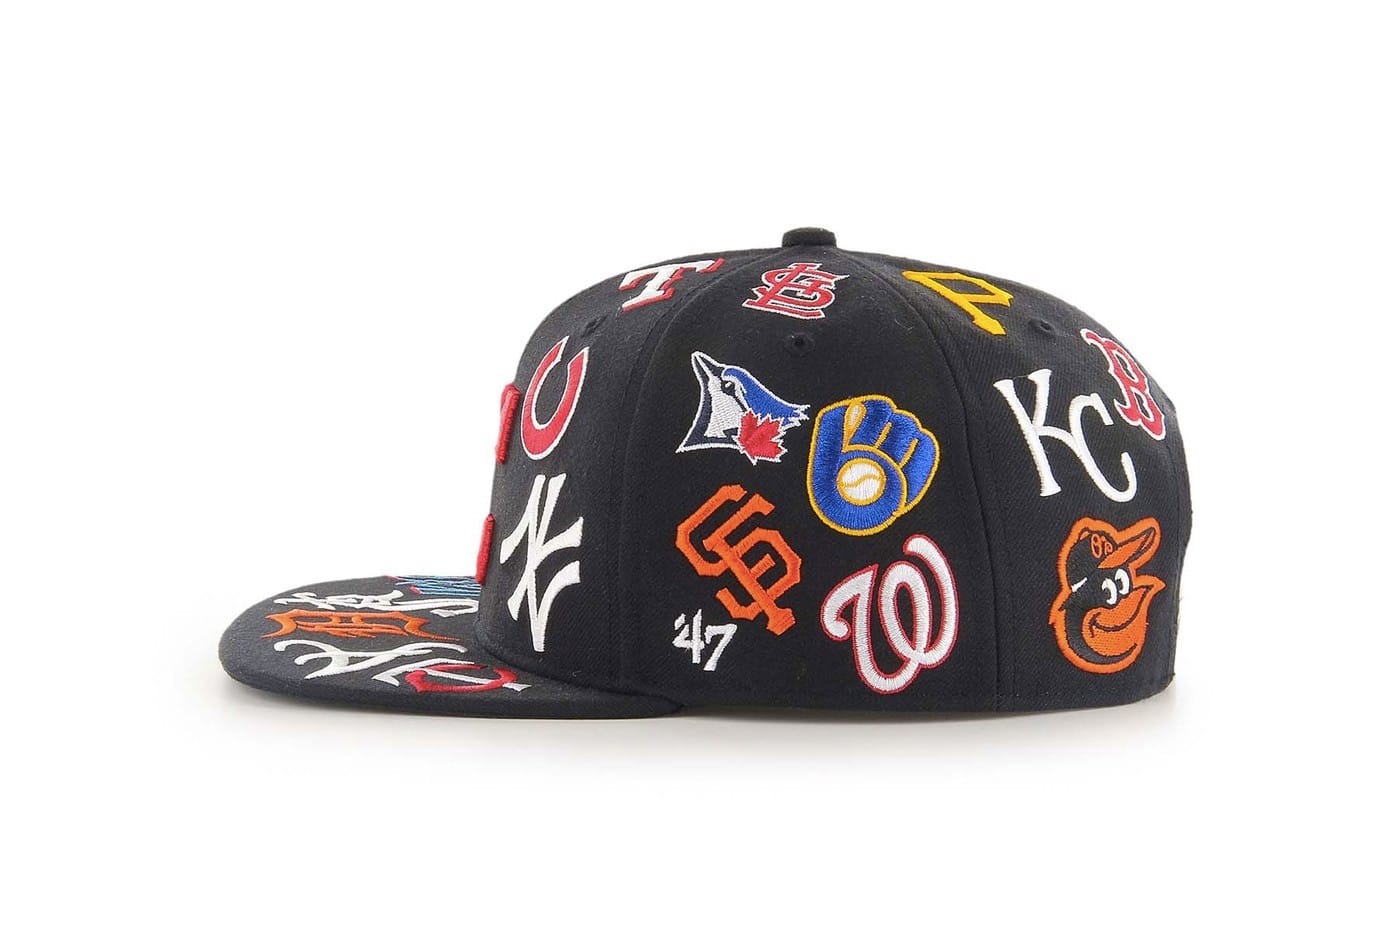 062421 Retro World Series Side Patch New Era 59Fifty Fitted Caps   Throwback Exclusive AllStar Game Hat and B  Fitted hats New era fitted  Custom fitted hats